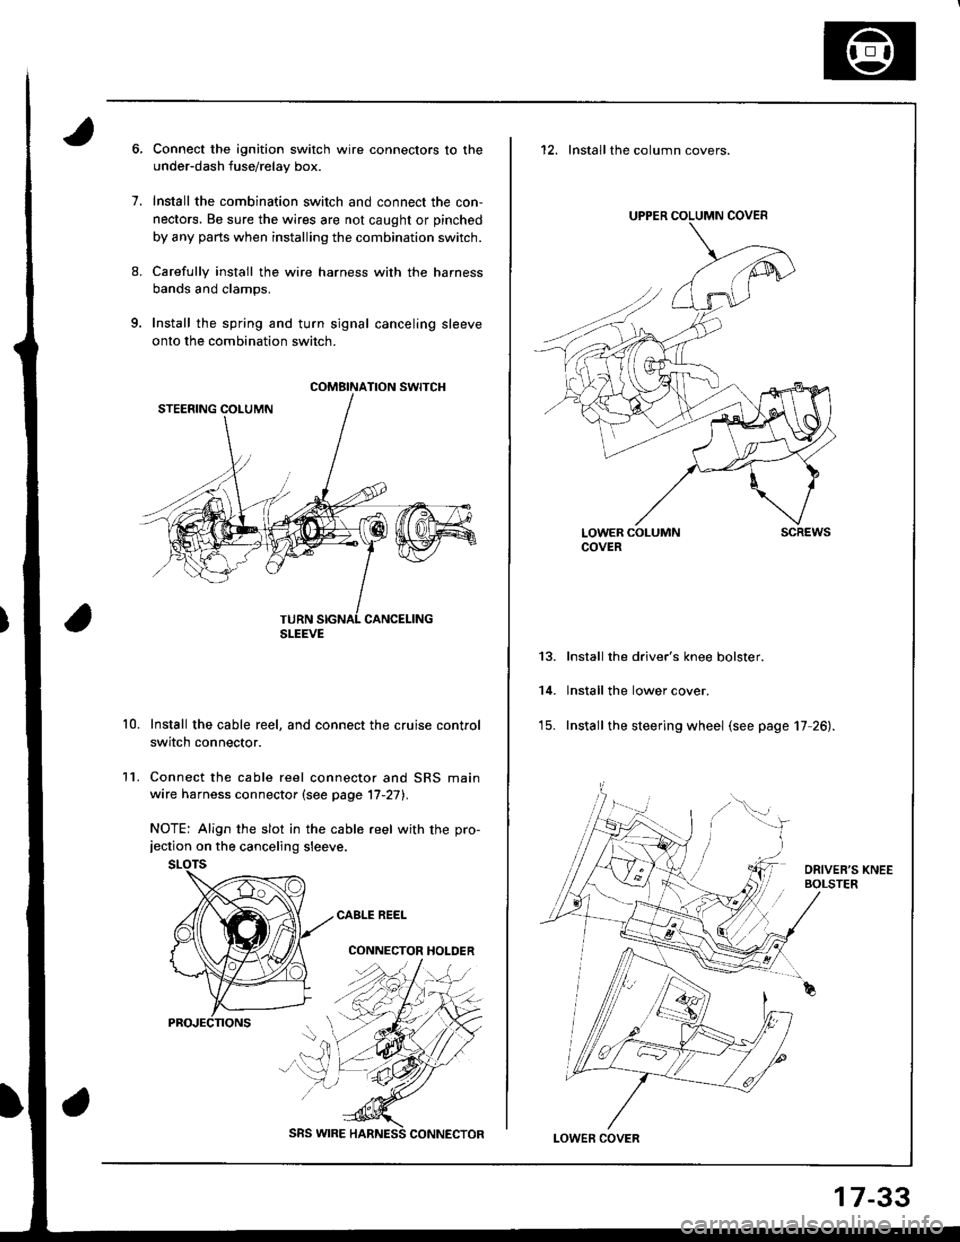 HONDA INTEGRA 1998 4.G Workshop Manual 9.
1.
8.
11.
10.
Connect the ignition switch wire connectors to the
under-dash fuse/relay box.
Install the combination switch and connect the con,
nectors. Be sure the wires are not caught or pinched
